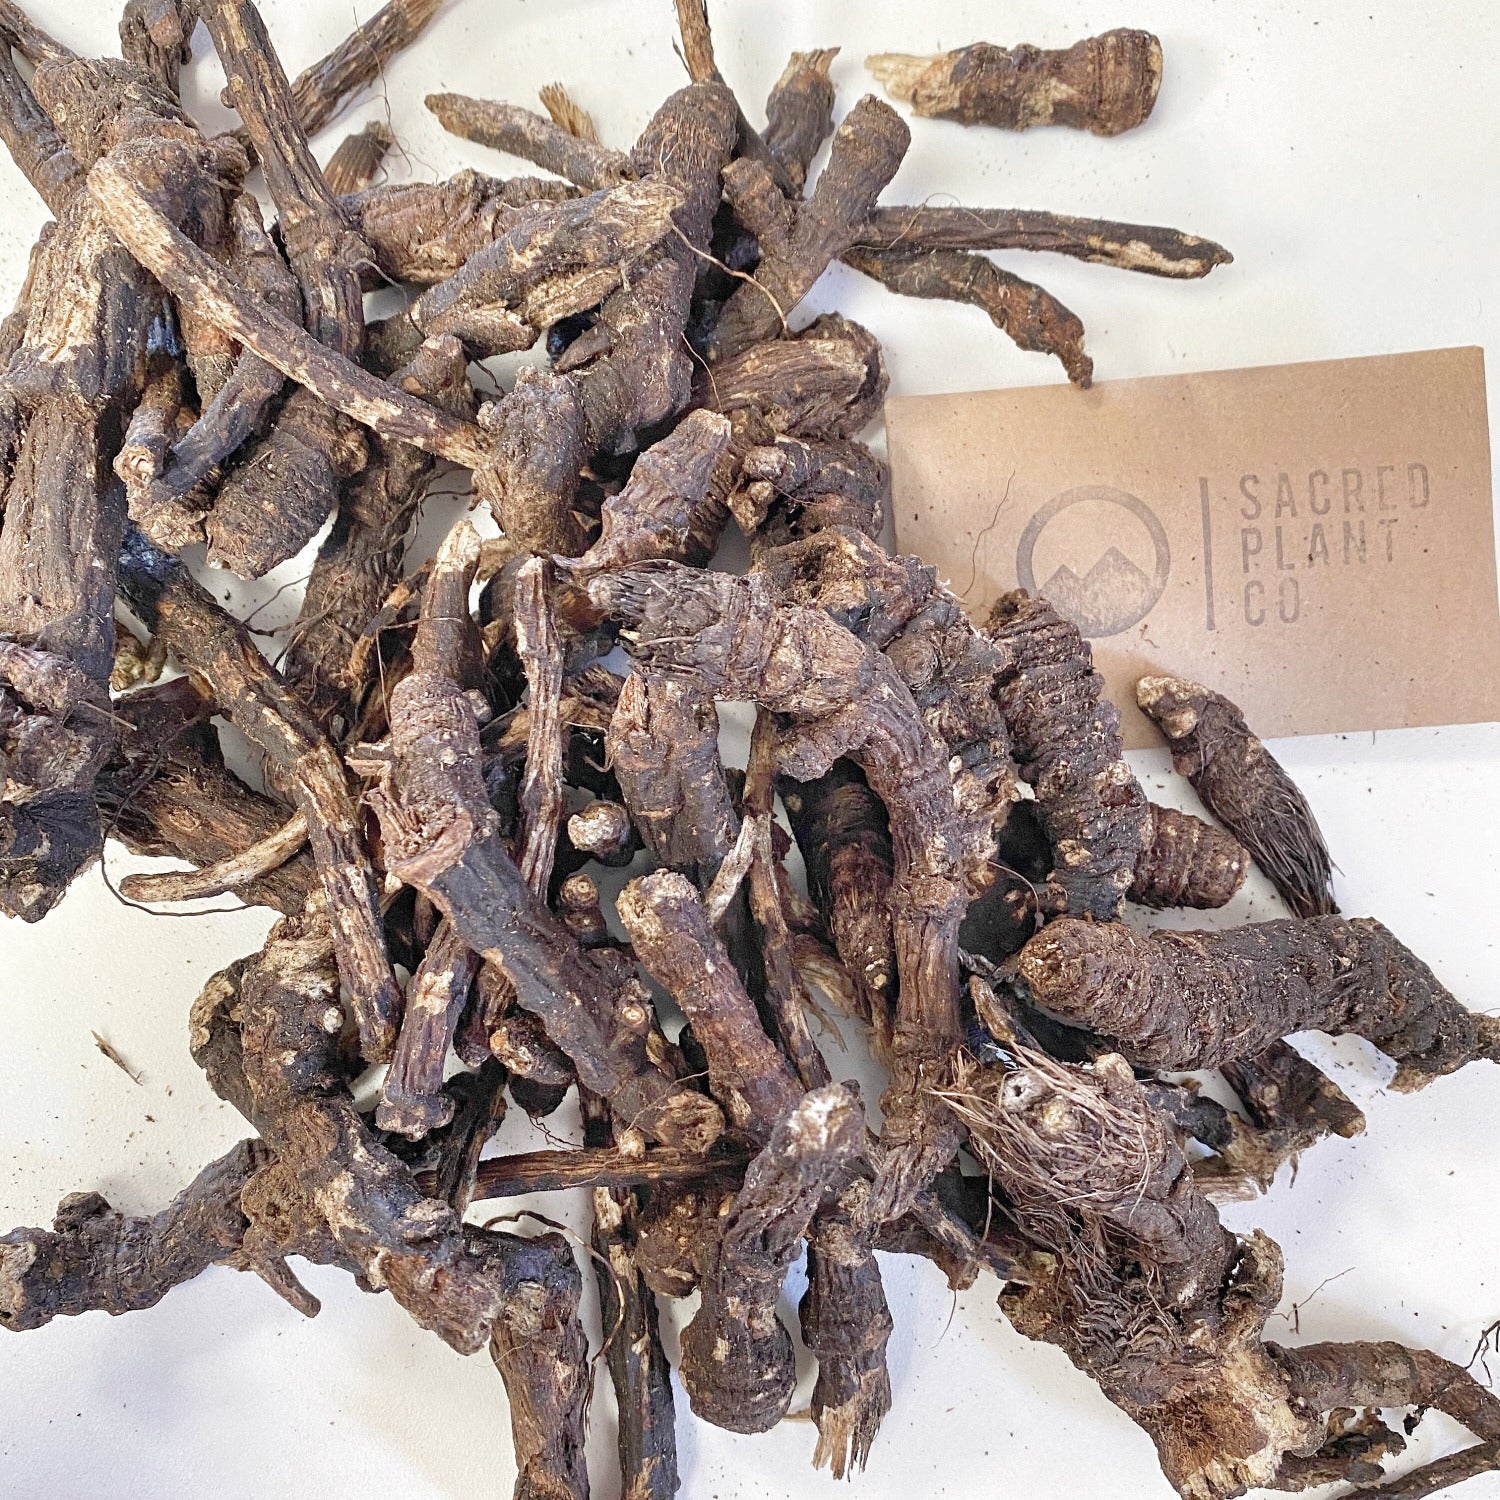 Close-up of dried Osha roots for sale, with Sacred Plant Co Brand Card.